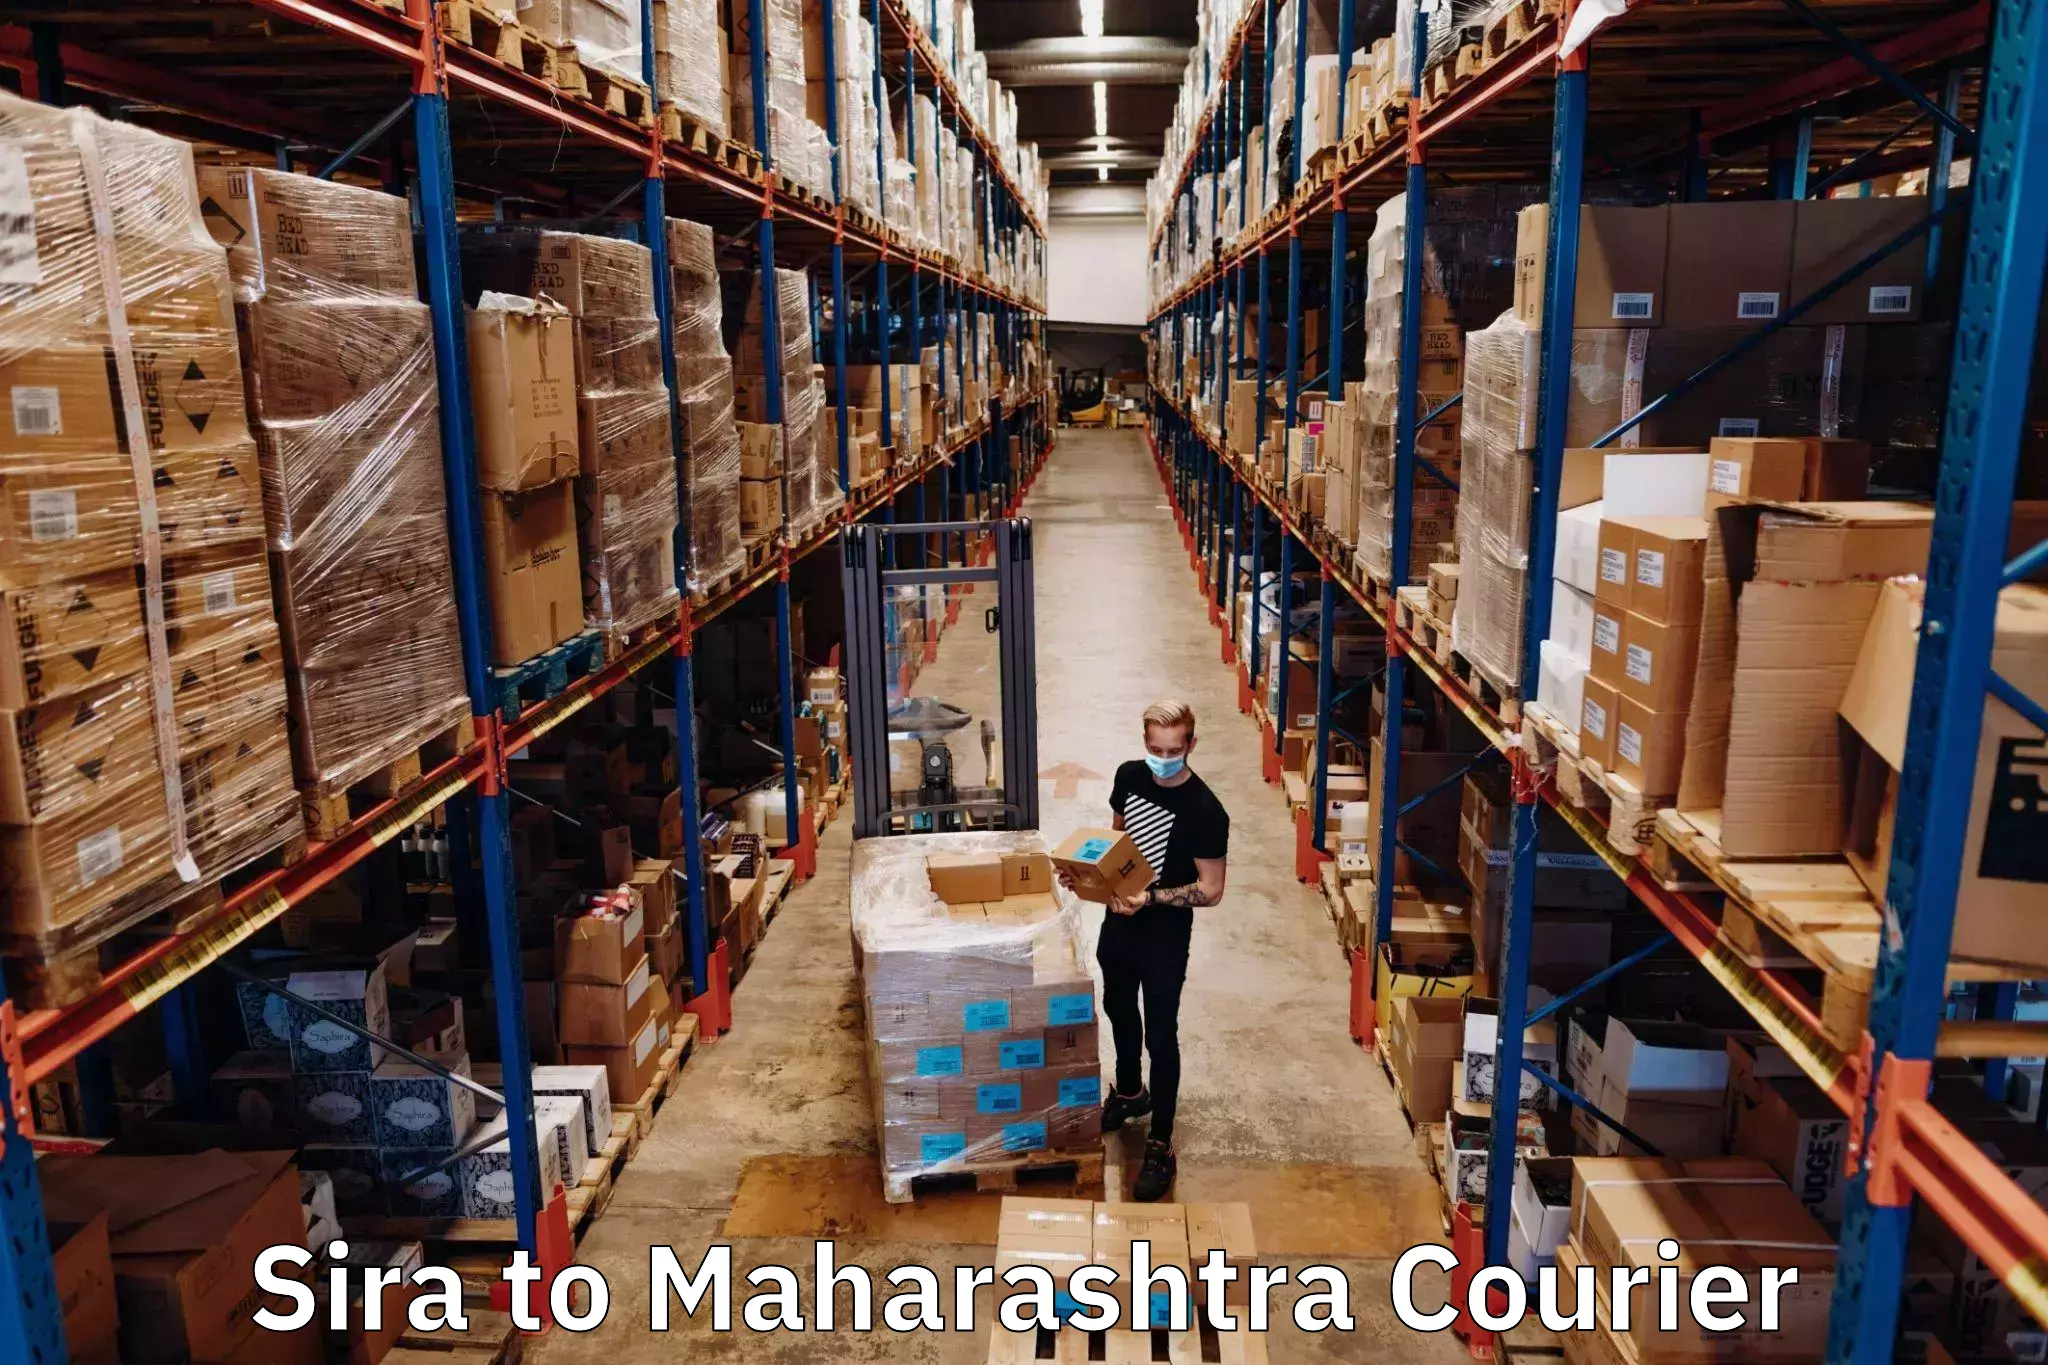 On-call courier service Sira to Gadchandur